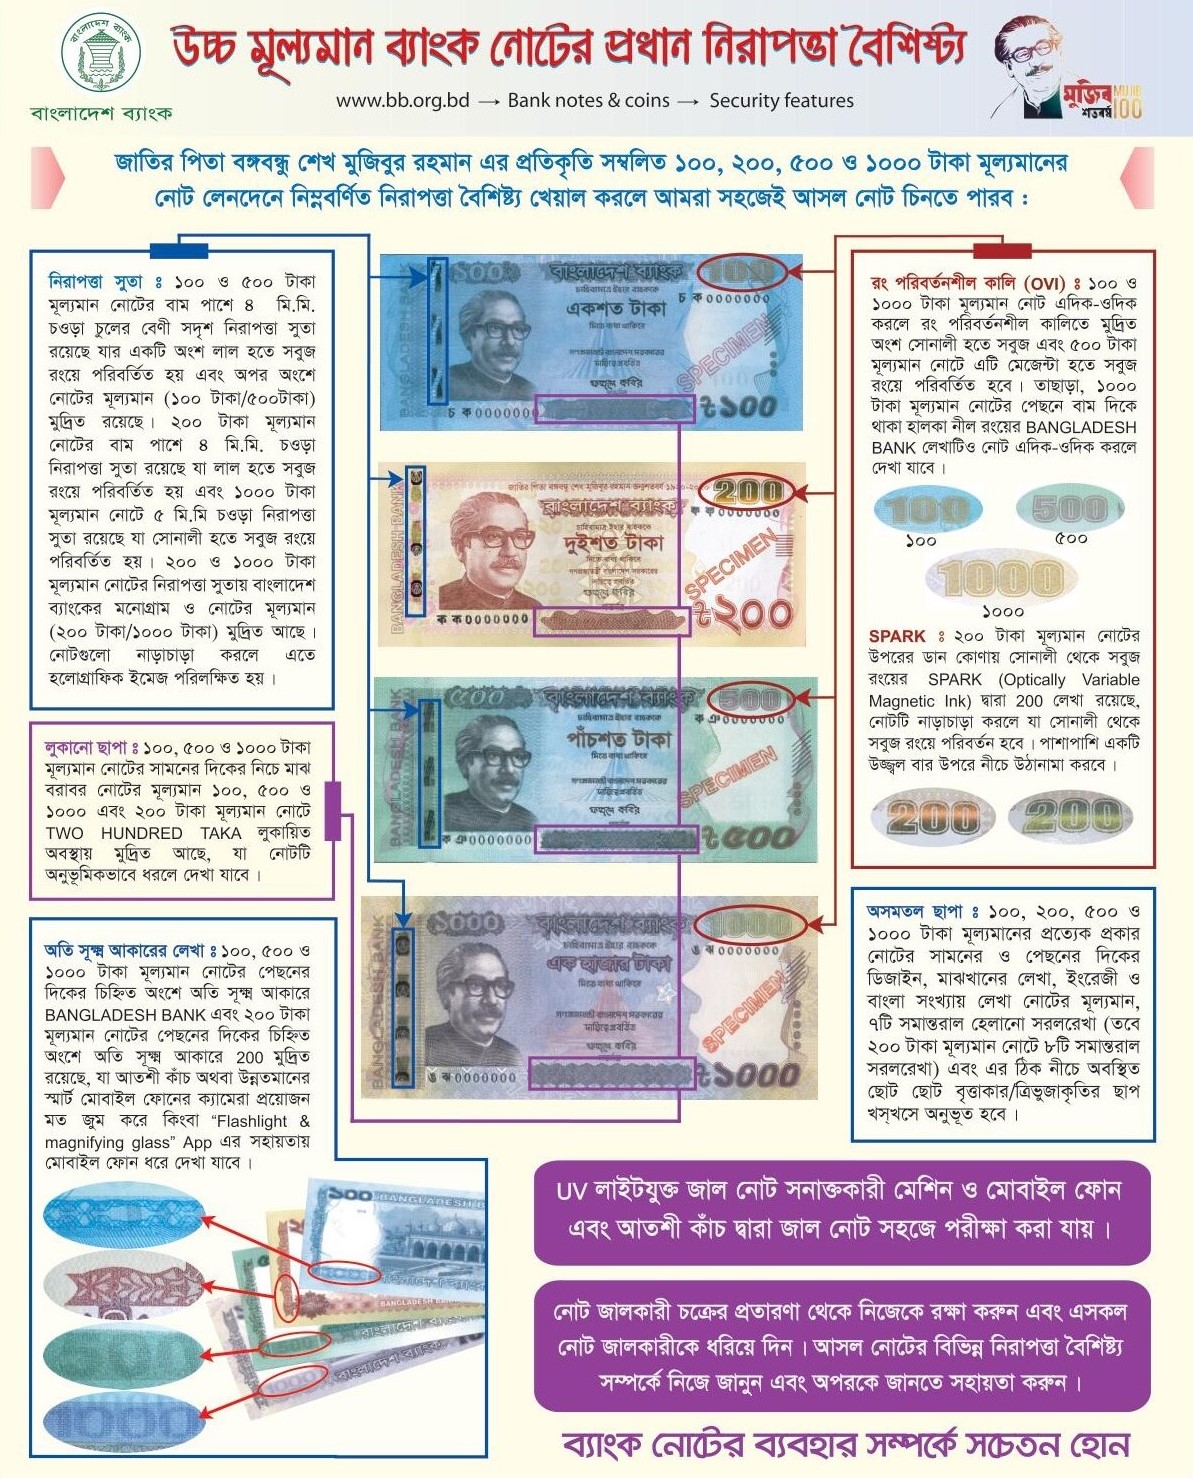 Security feature of bank notes